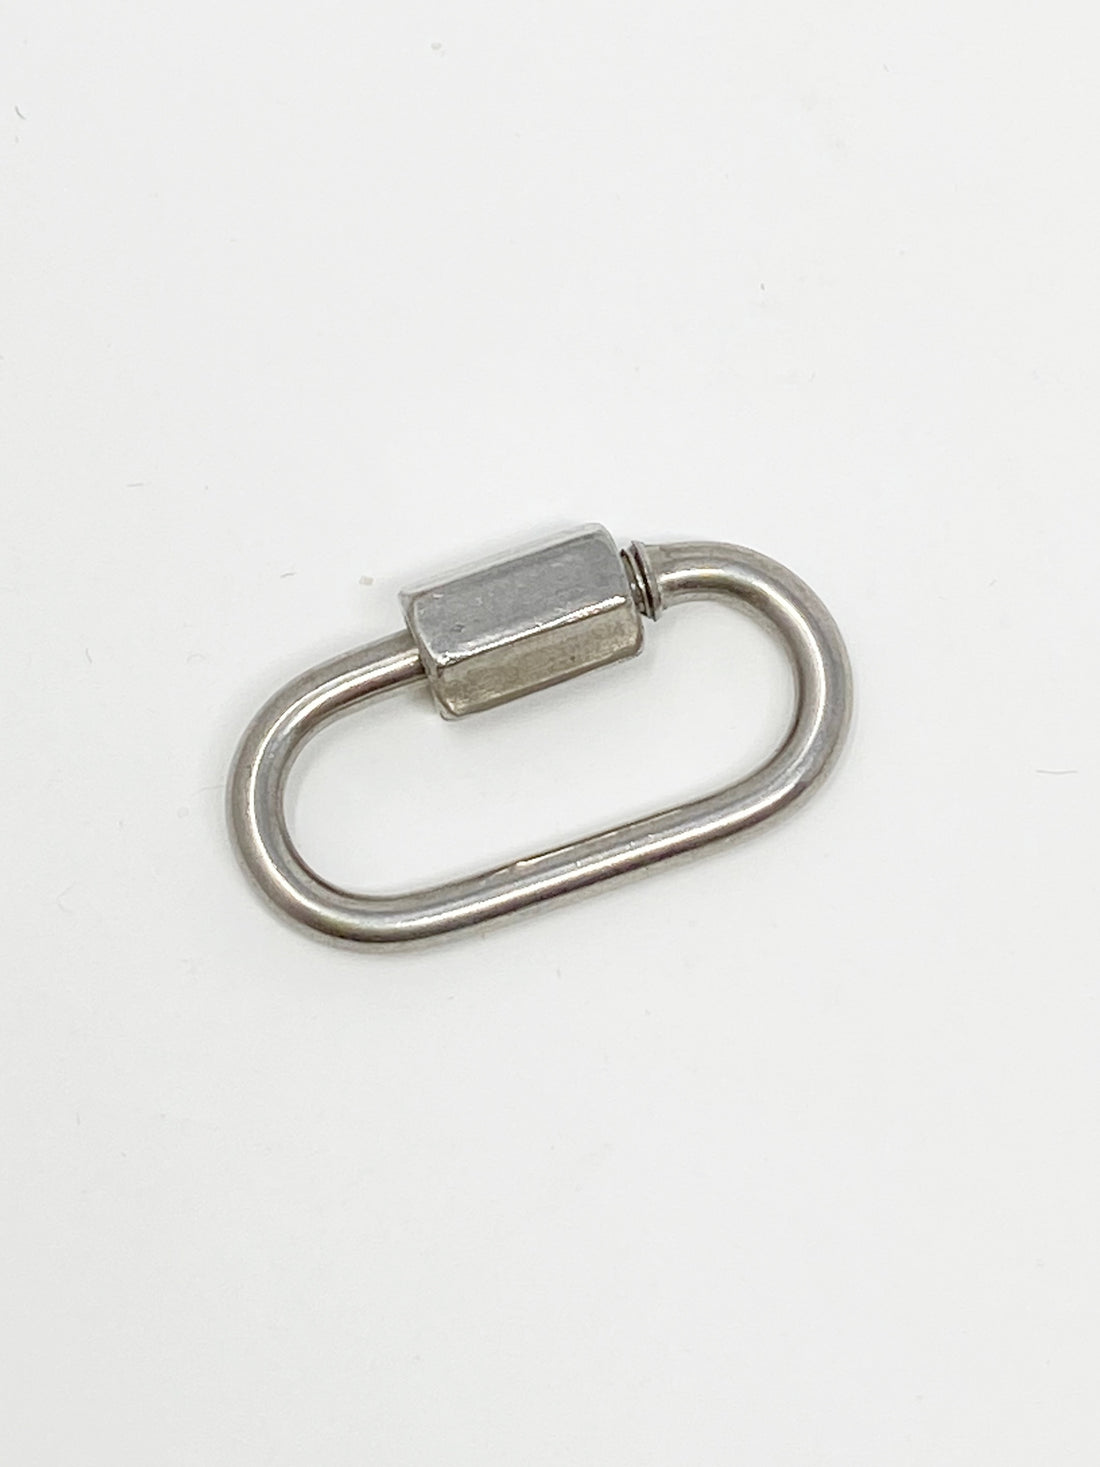 Charming Carabiner Clip in Silver